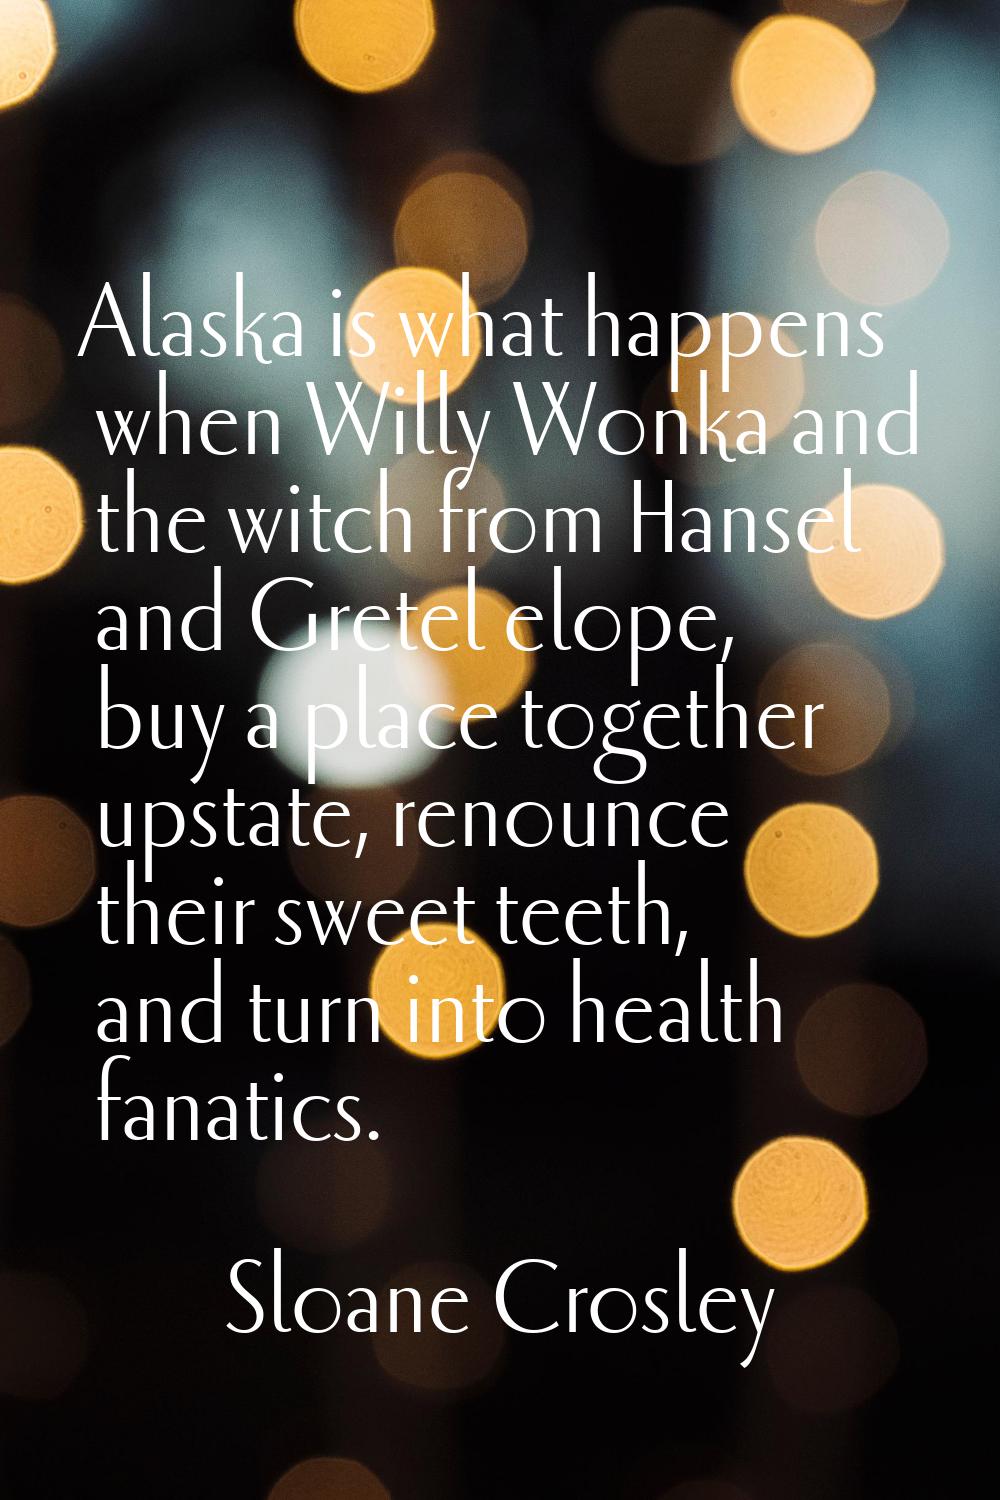 Alaska is what happens when Willy Wonka and the witch from Hansel and Gretel elope, buy a place tog